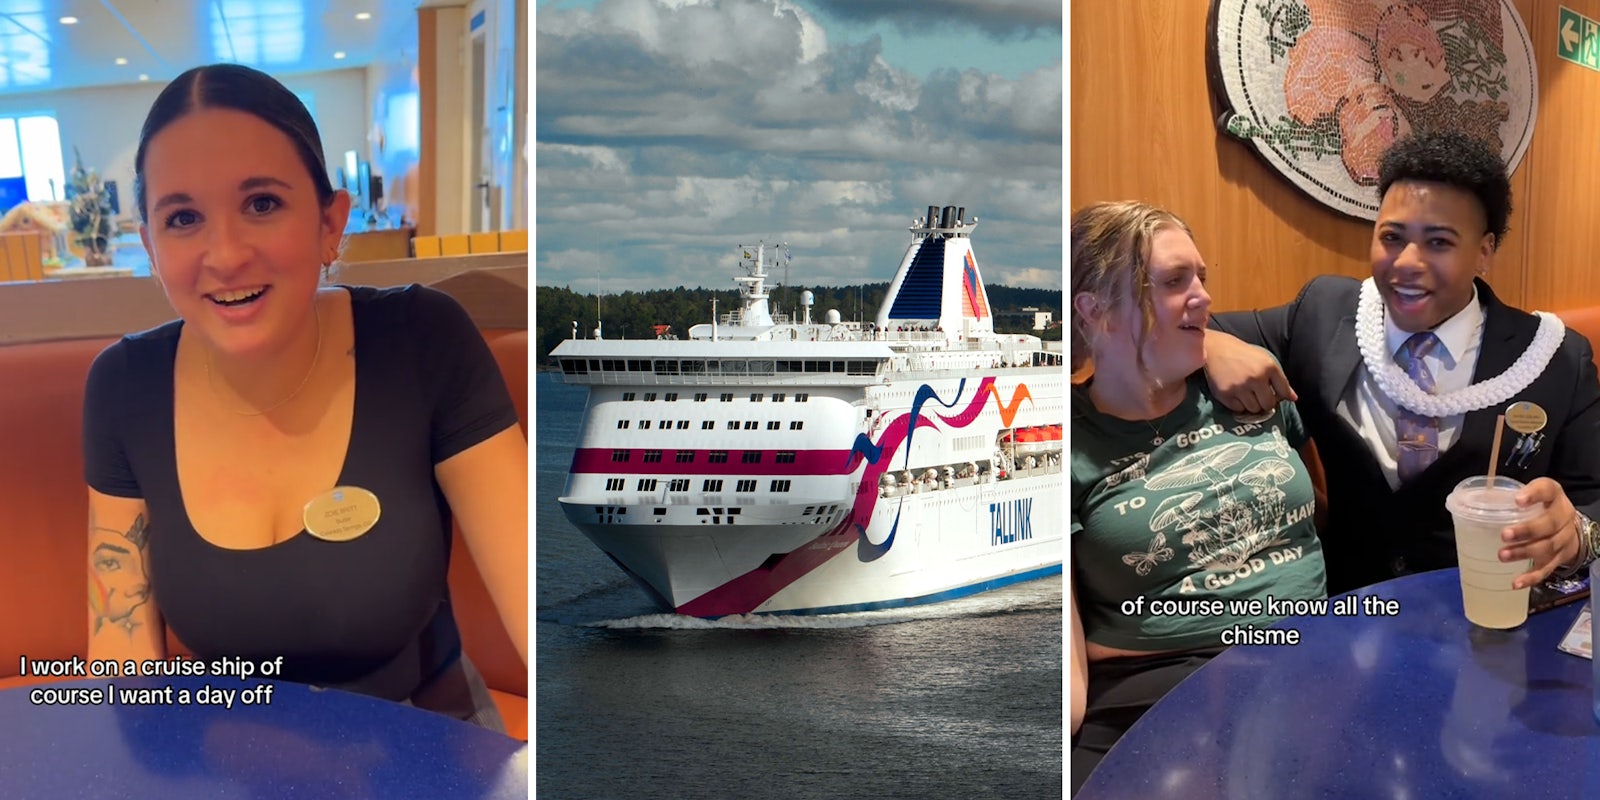 Cruise ship workers reveal what the job is really like day-to-day